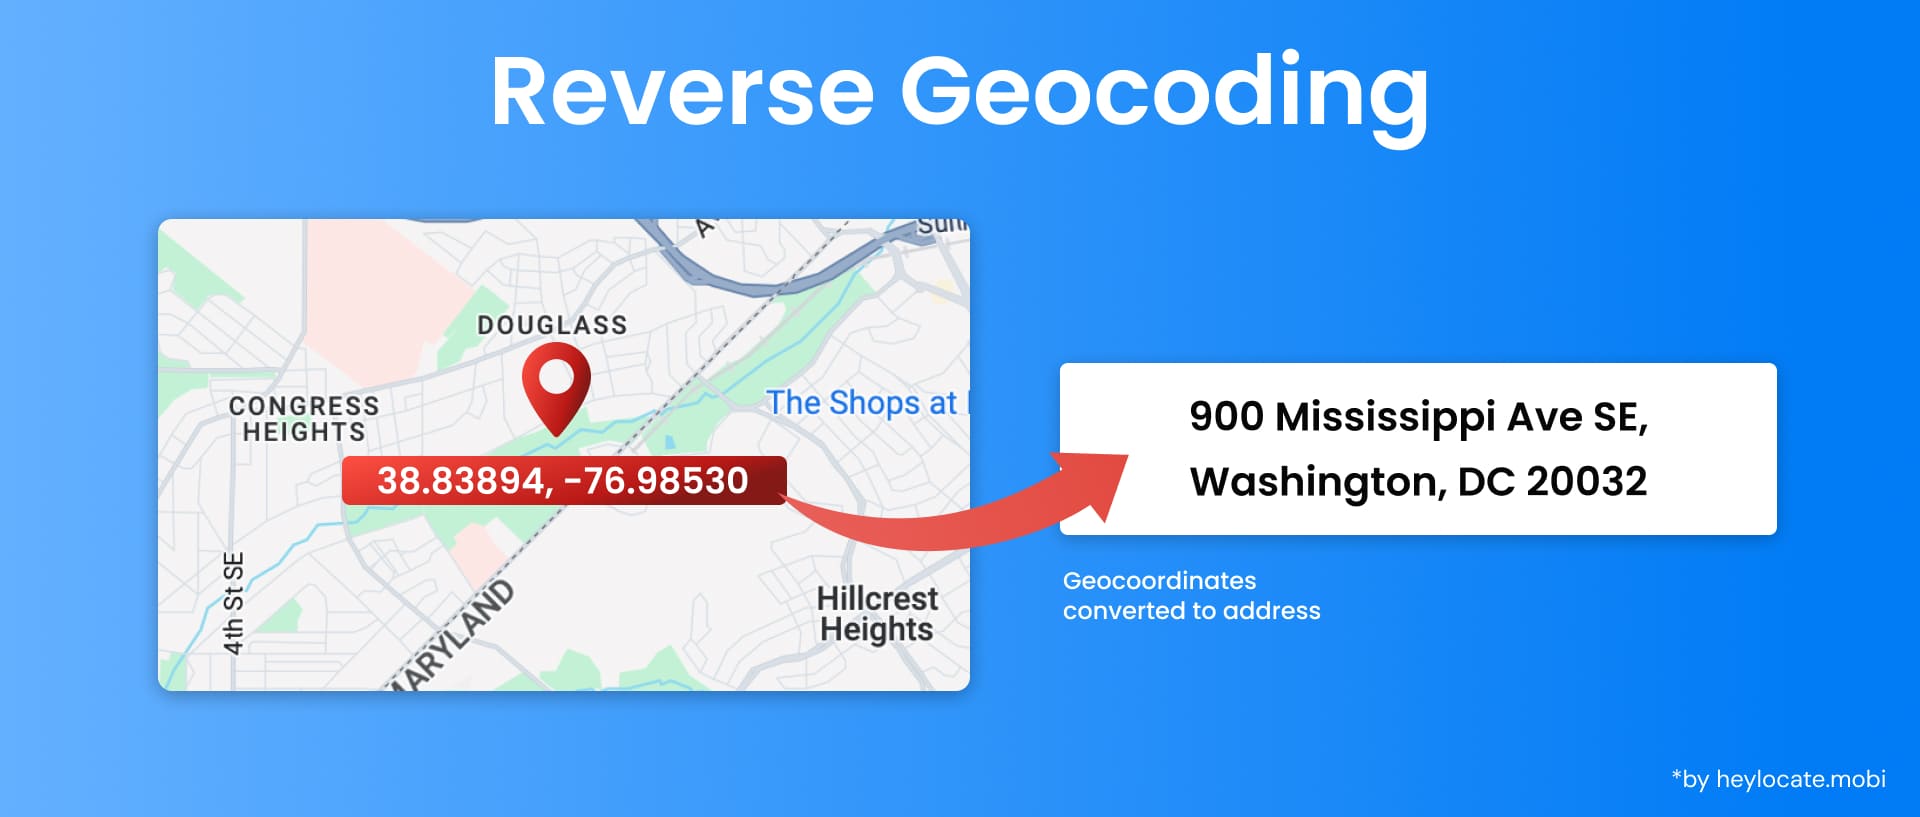 An infographic showcasing what reverse geocoding is by translating geocoordinates into a physical address, illustrated with a map pinpoint and a highlighted address.